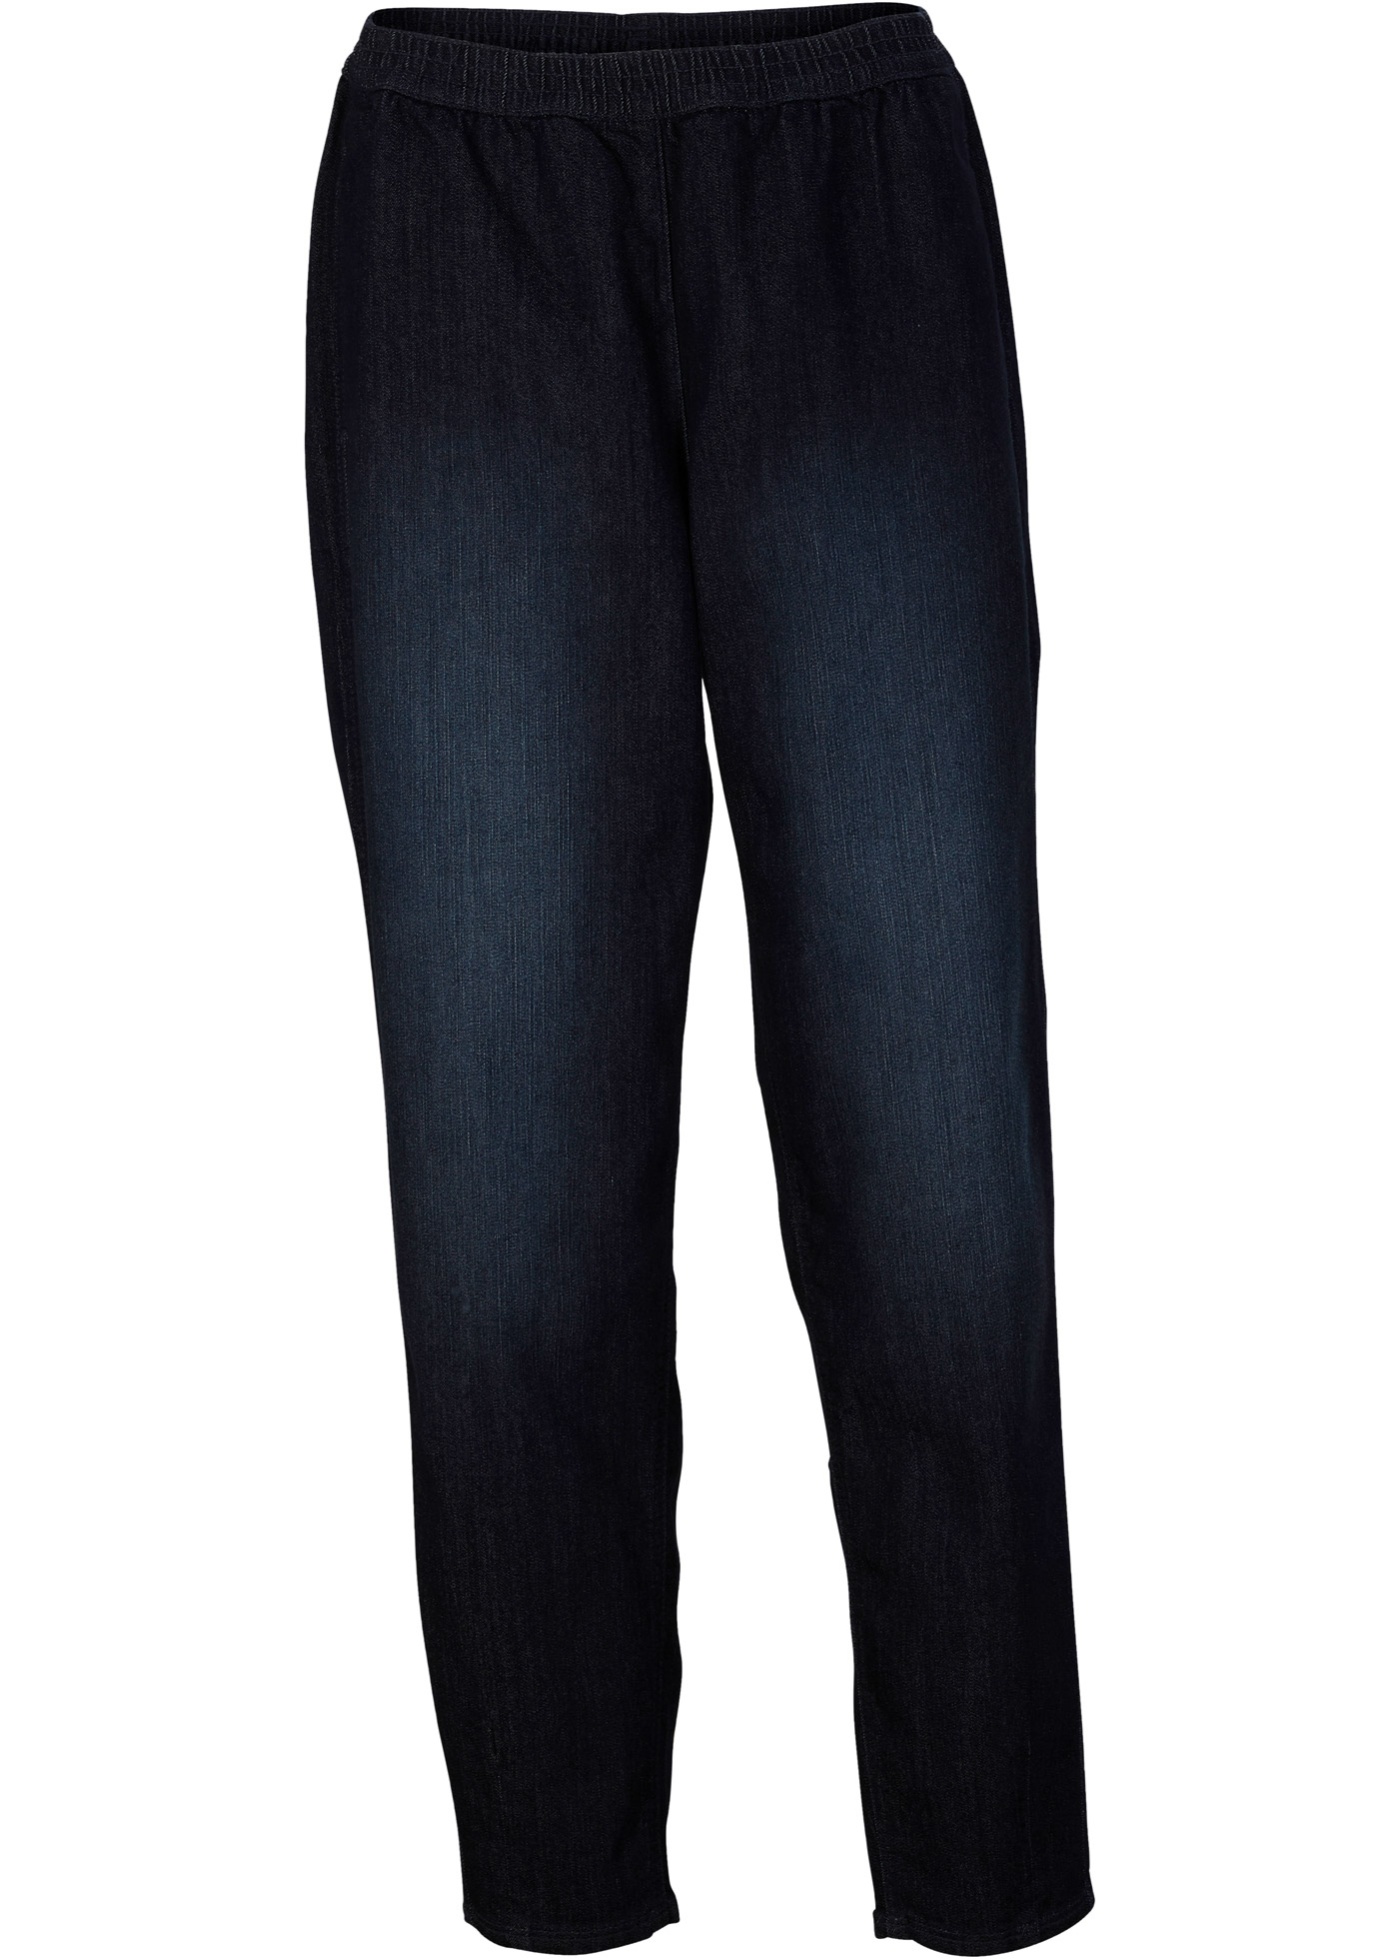 Jeans met comfortband, tapered